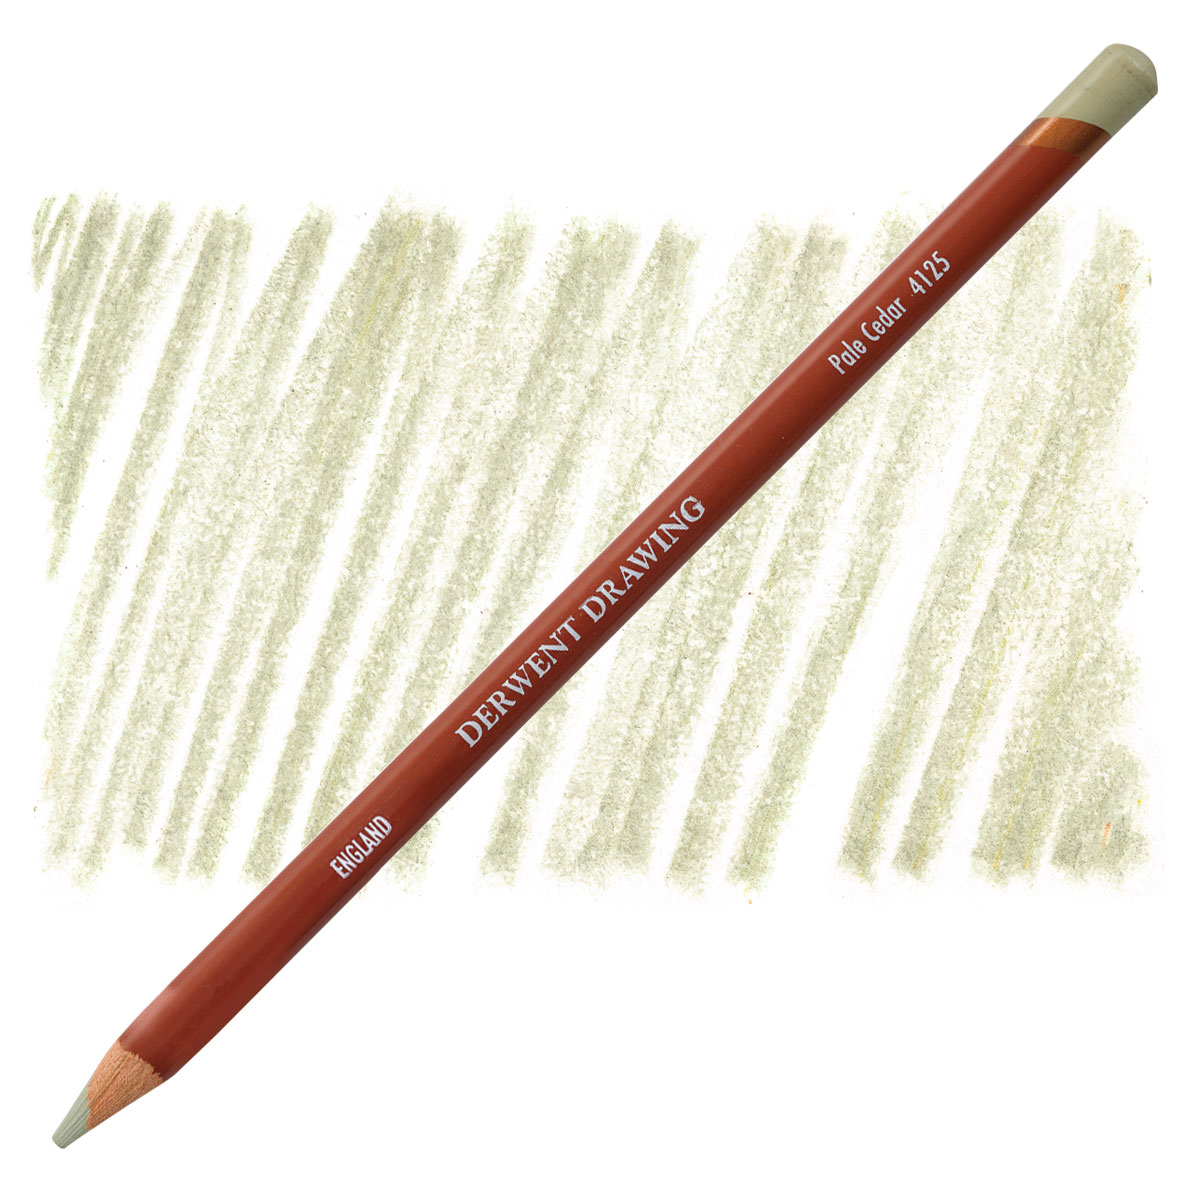 Derwent Watersoluble Sketching Pencils Medium Wash 4B  Pack of 12   Charcoal  Graphite  YPO